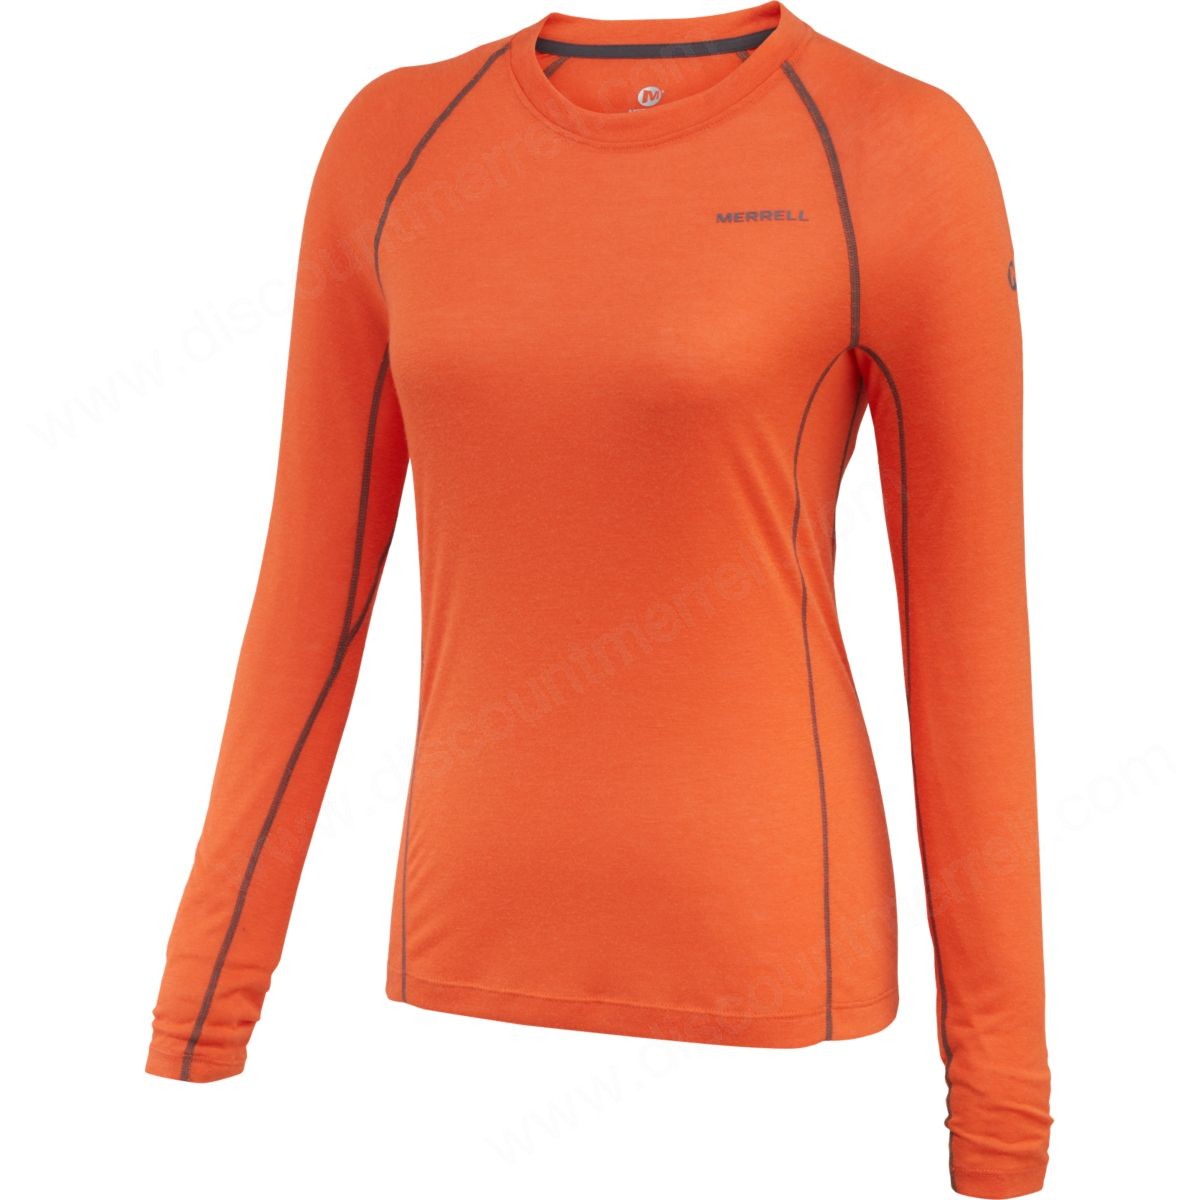 Merrell Lady's Paradox Long Sleeve Tech Tee With Drirelease® Fabric Lychee Heather - Merrell Lady's Paradox Long Sleeve Tech Tee With Drirelease® Fabric Lychee Heather